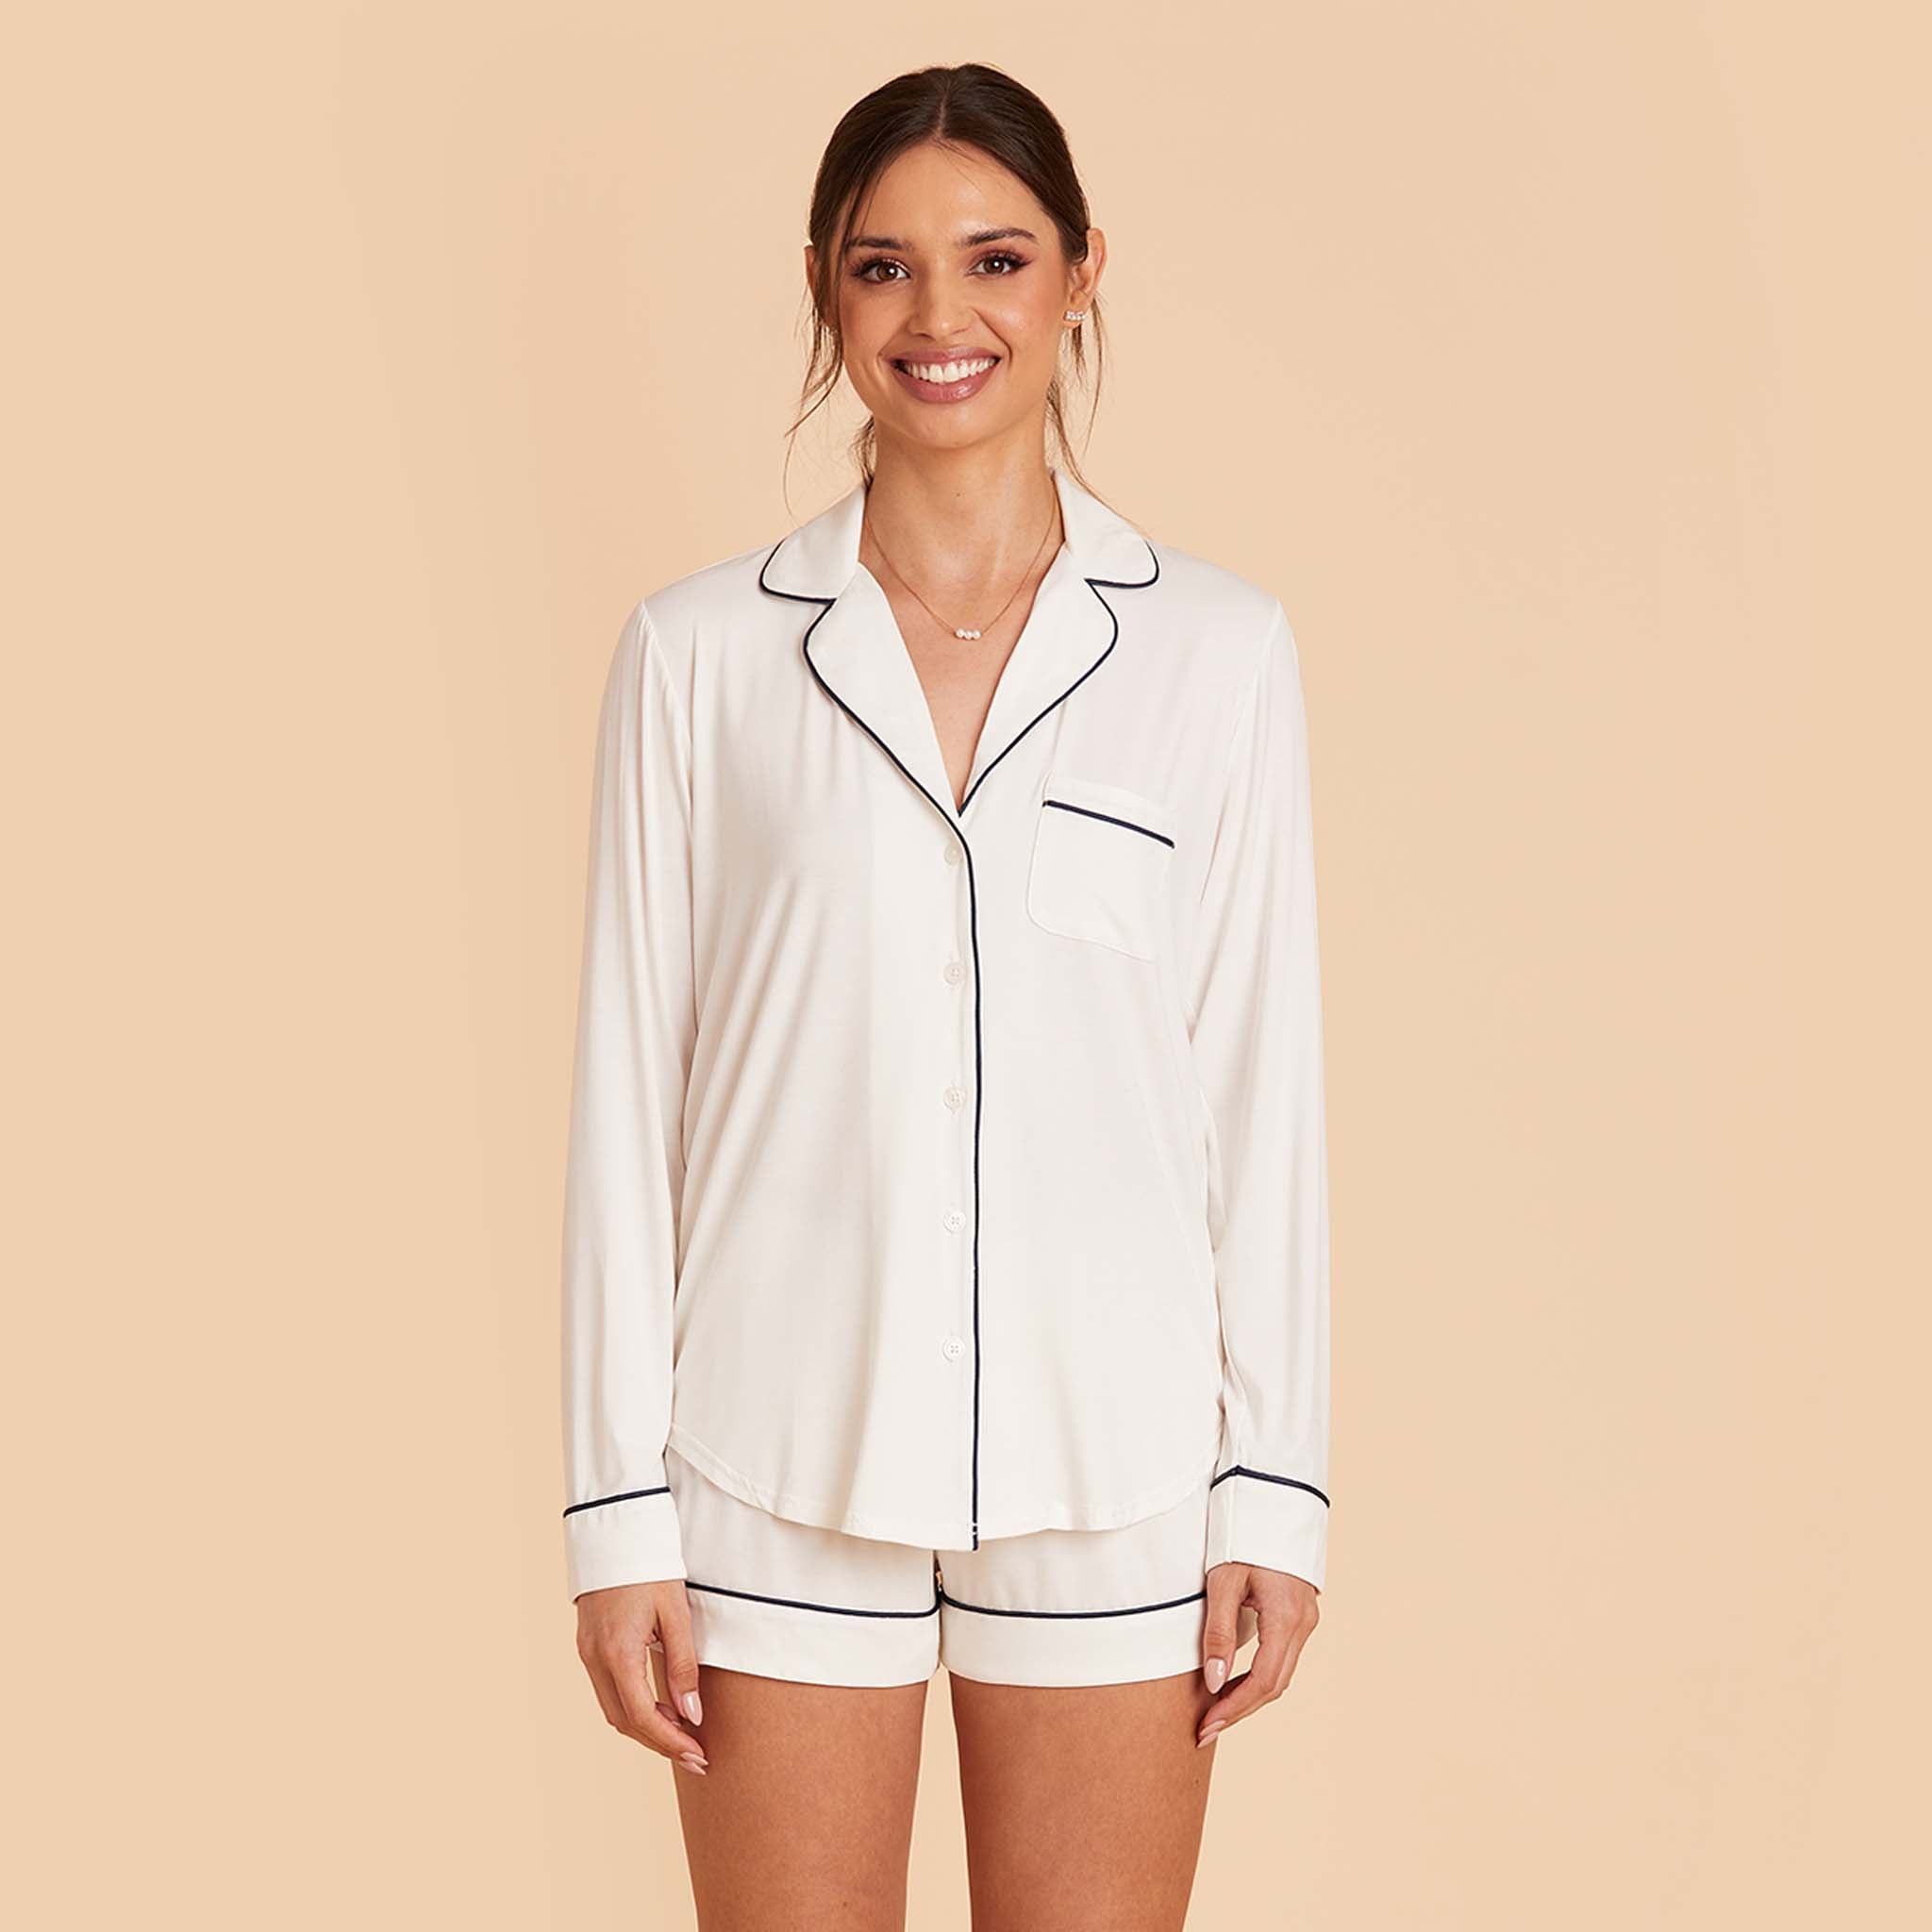 Trendsi Button-Up Shirt and Pants Pajama Set White / S